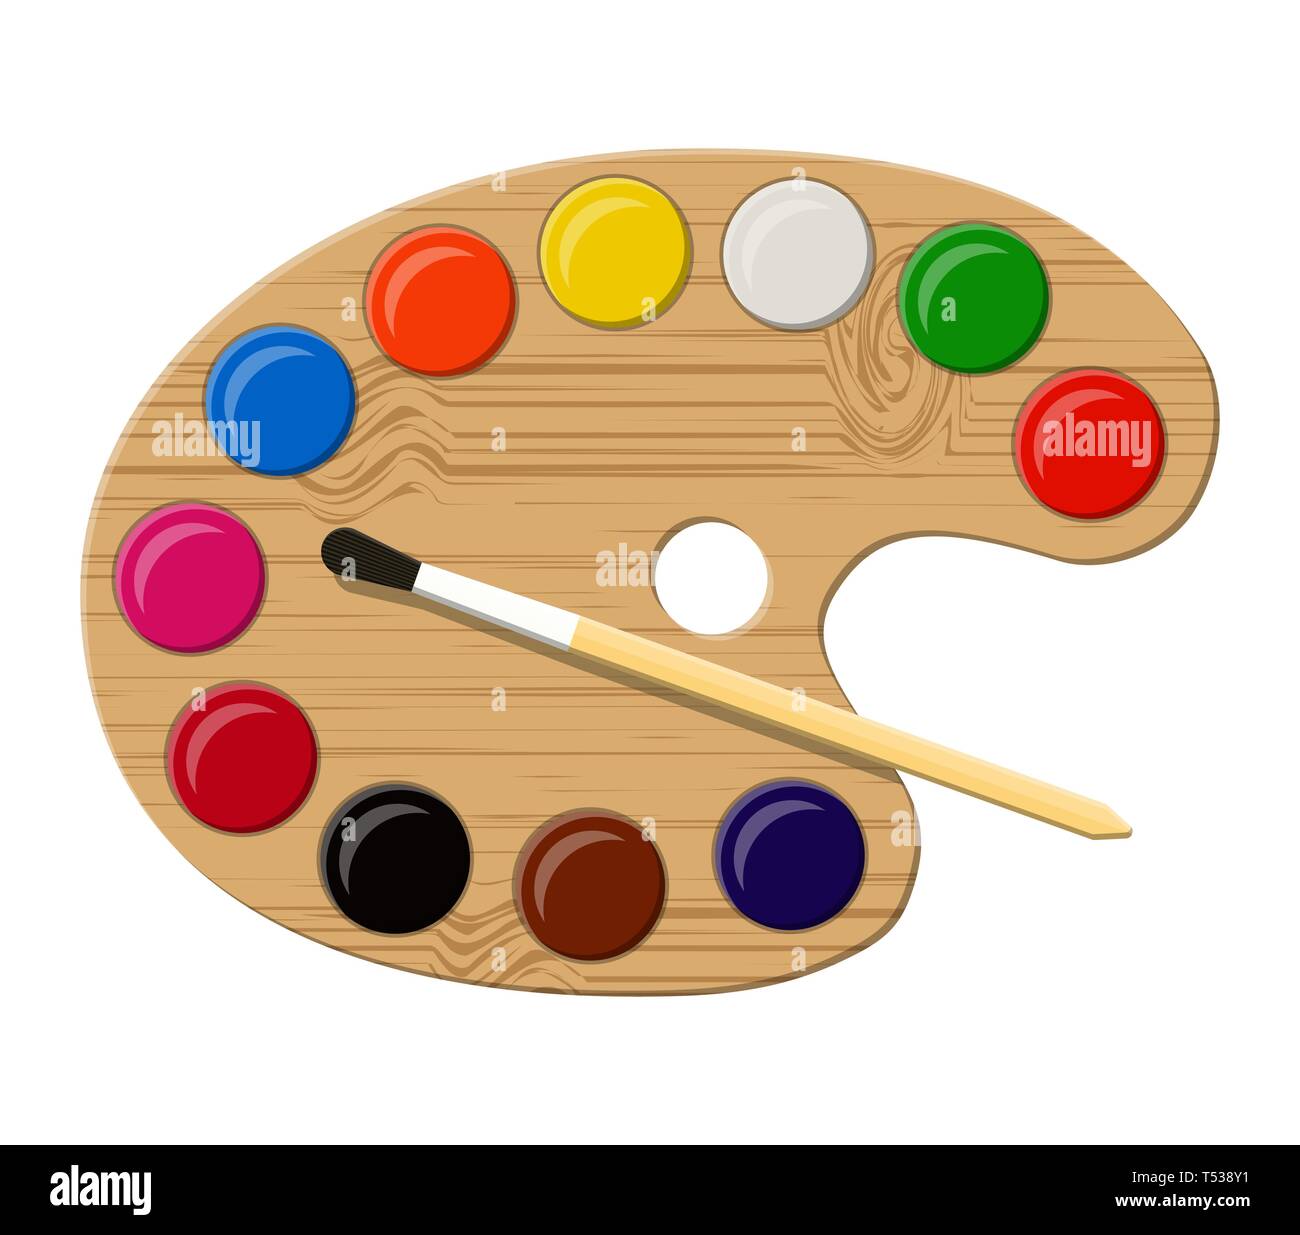 Wooden Painters Palette with Colourful Paint and Brush